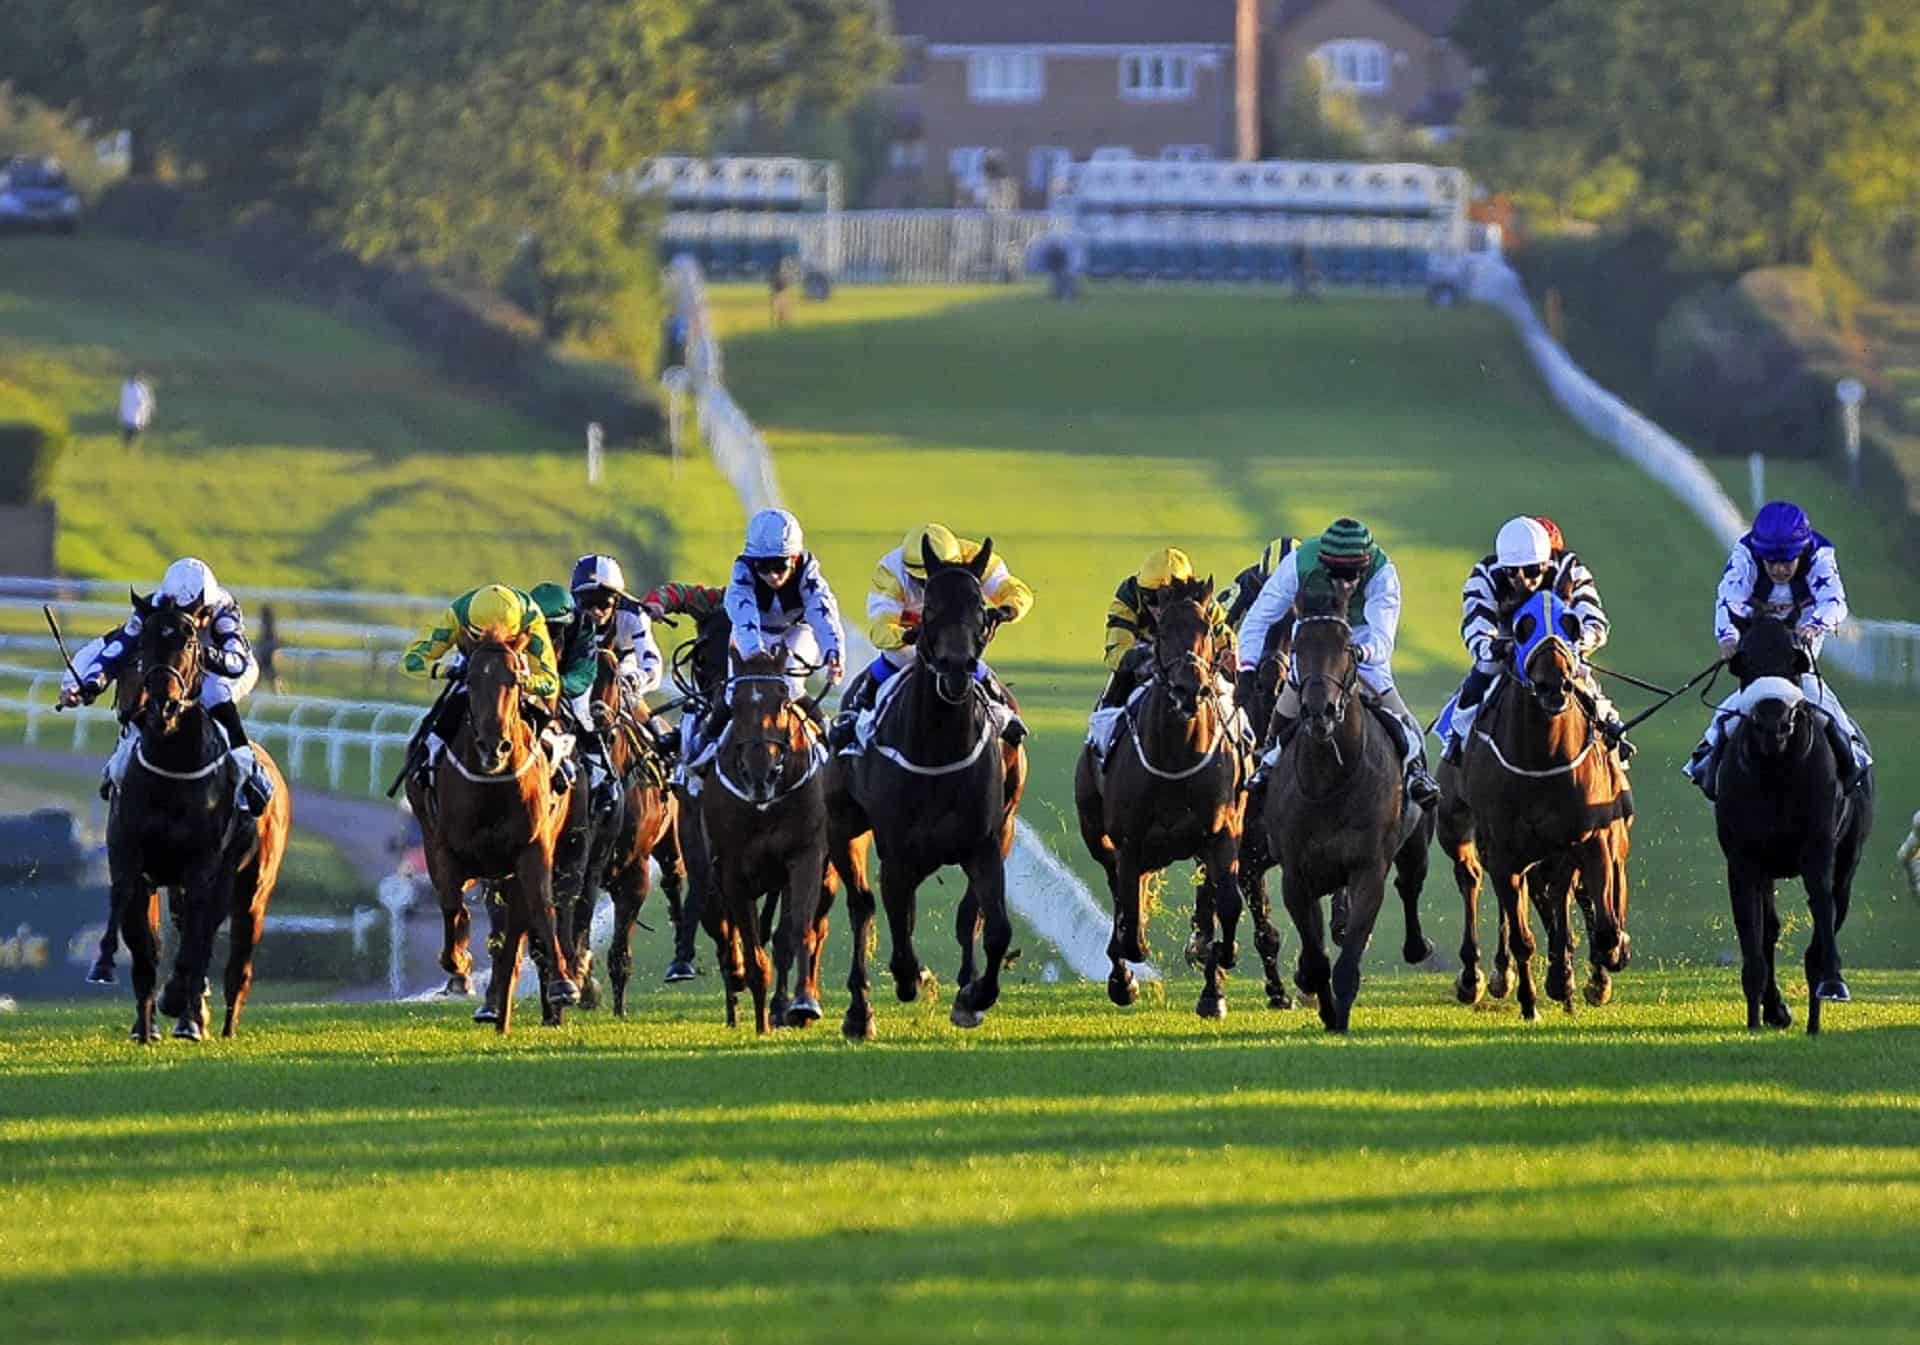 Leicester Racecourse in UK